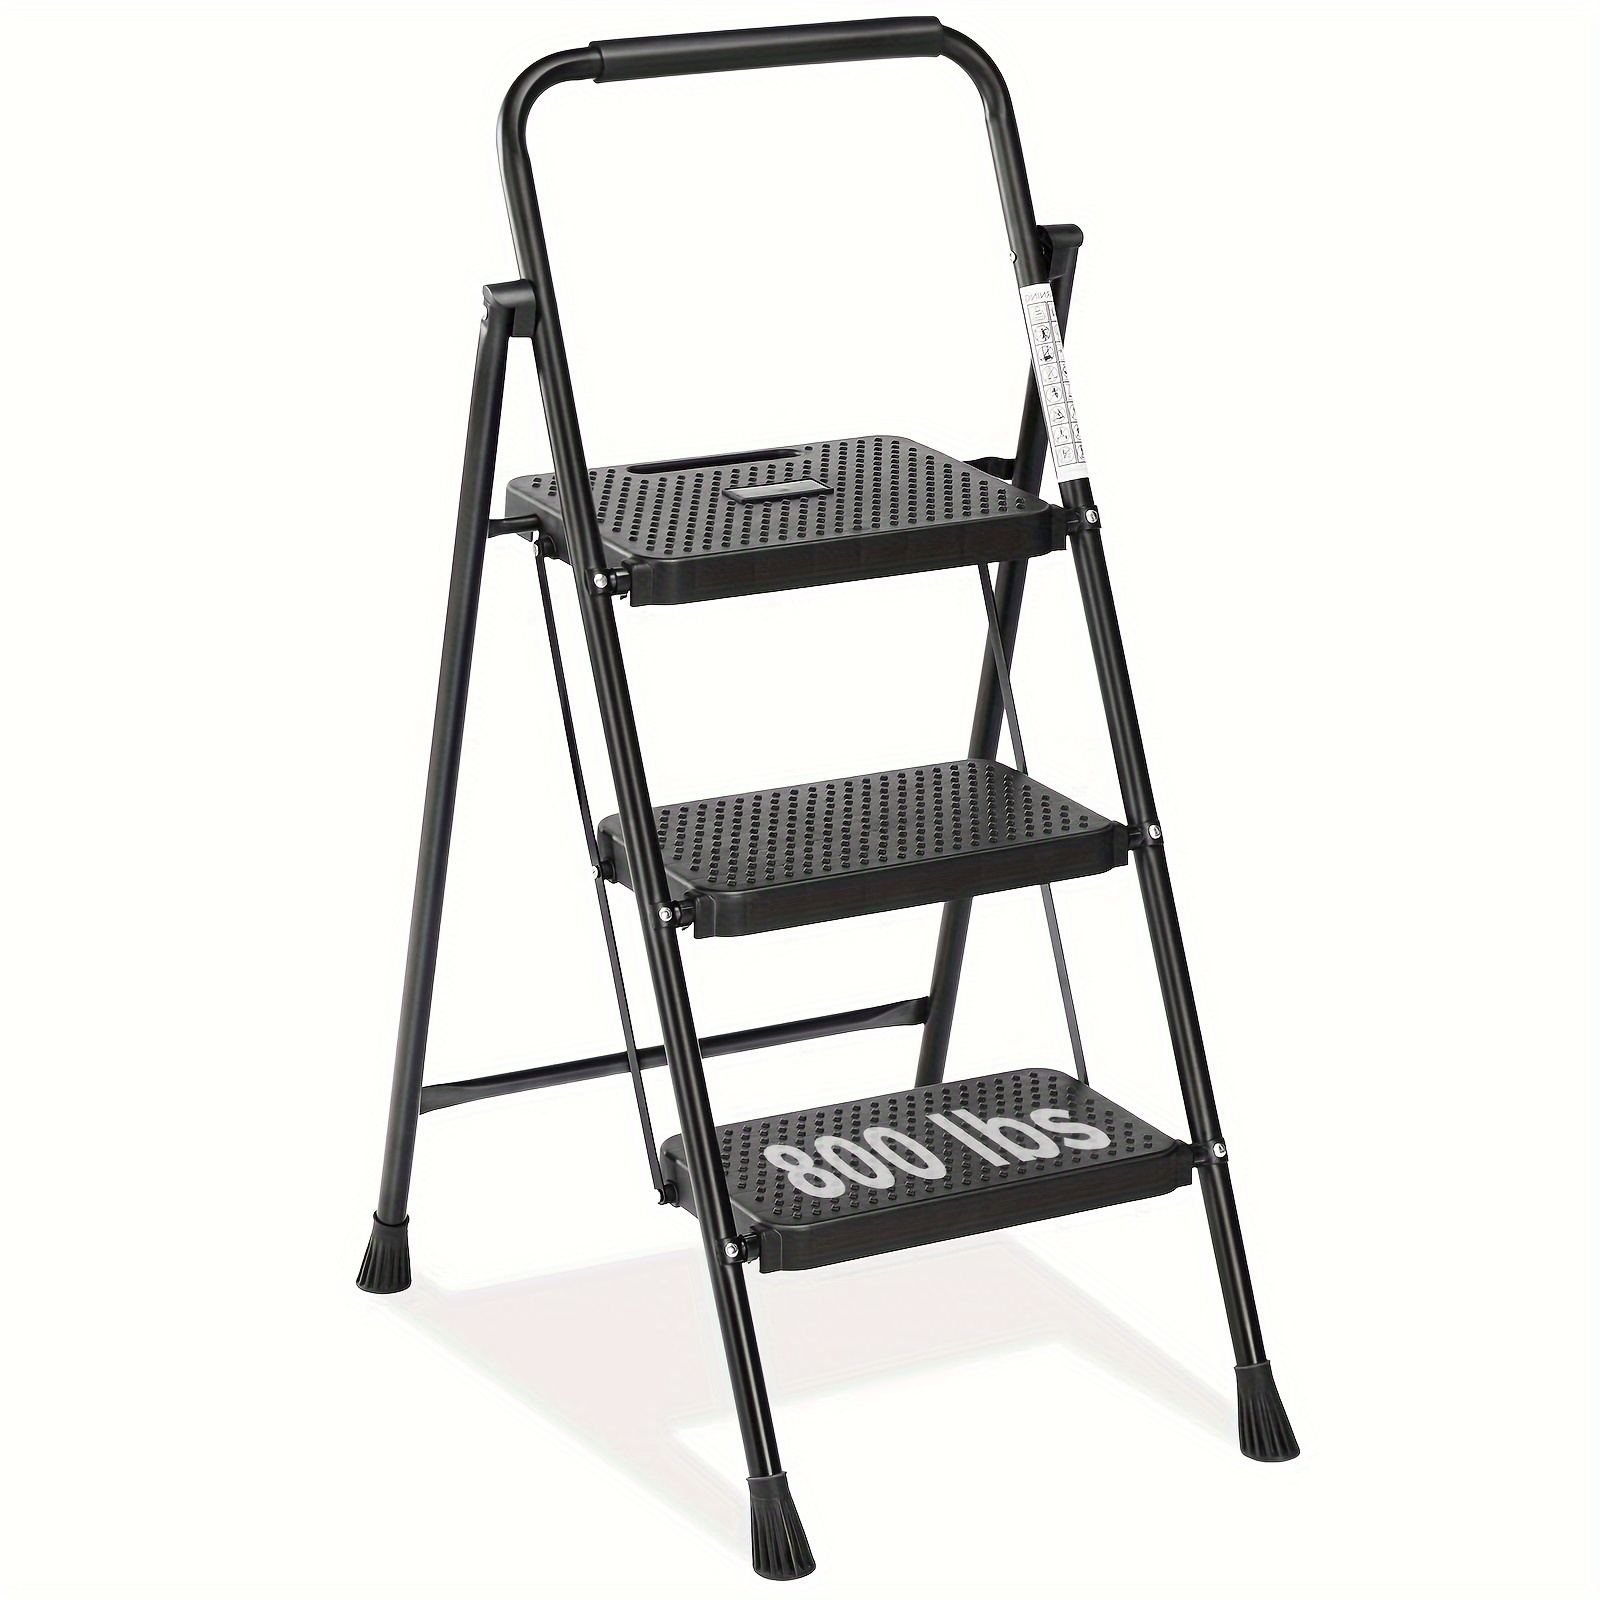 

2 Step/3 Step Ladder, Folding Step Stool With Anti-slip Pedal, Portable Step Tool Steel Ladder Sturdy Metal Support Household Tool